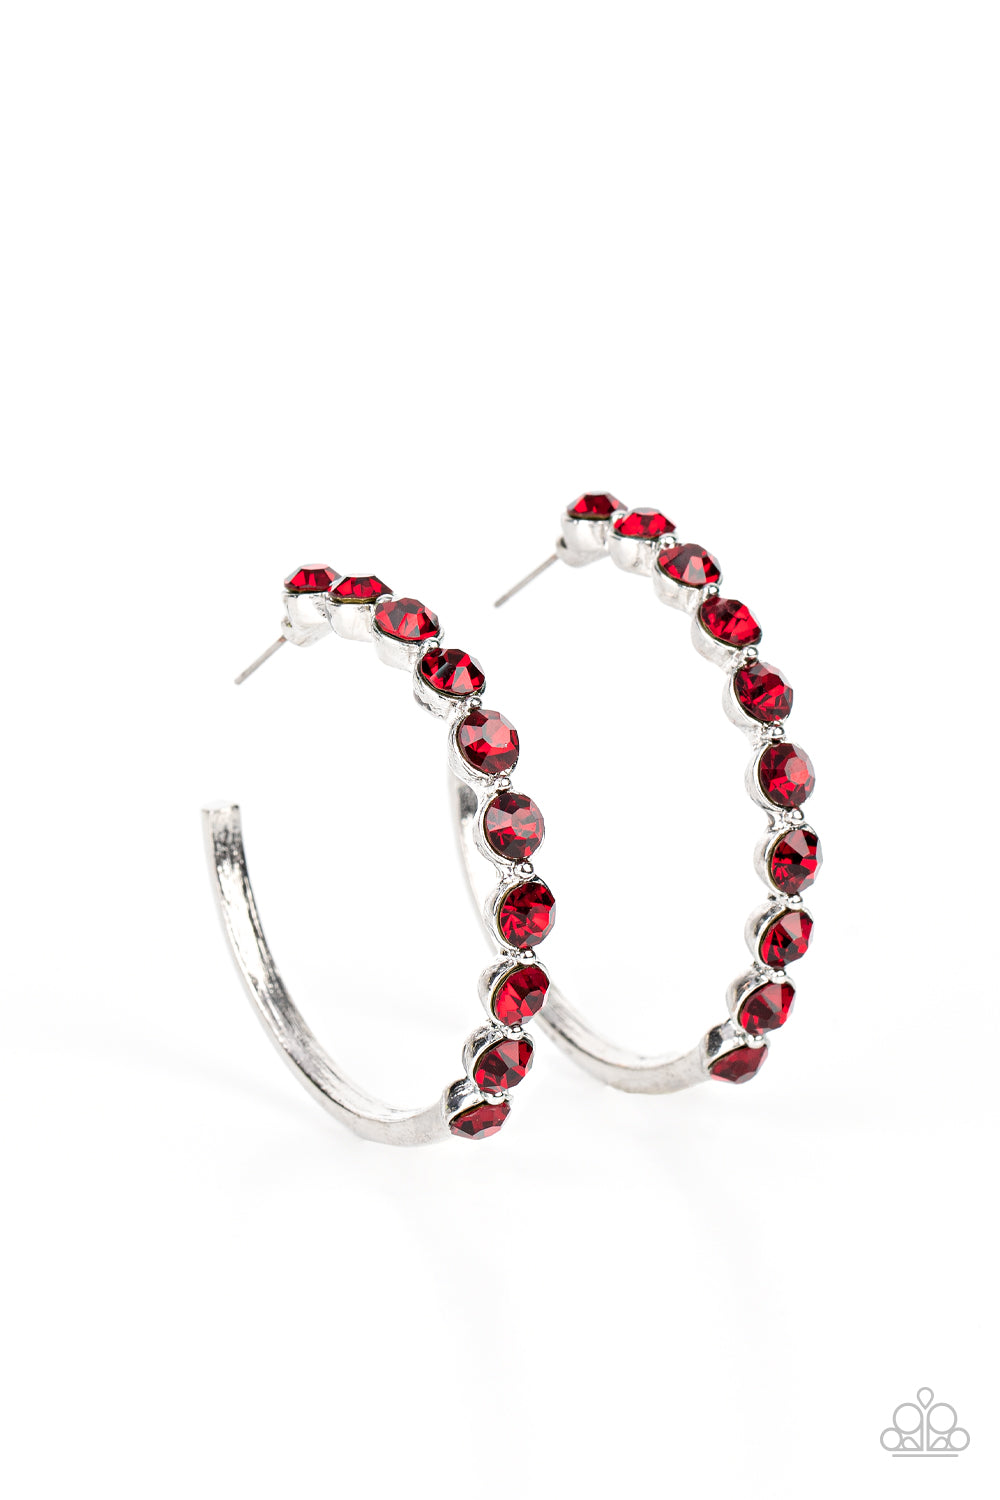 Paparazzi Photo Finish Red Post Hoop Earrings